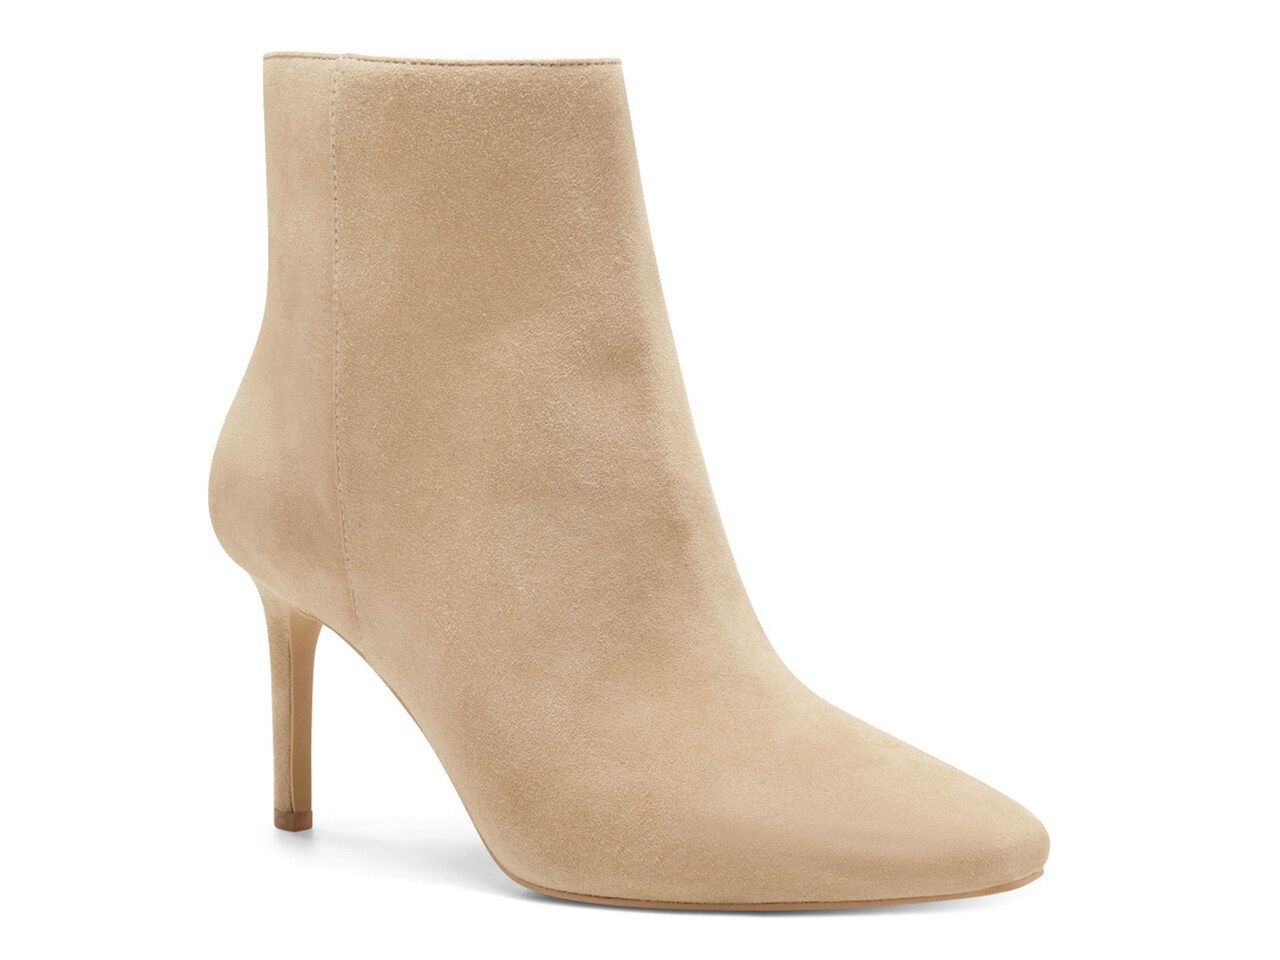 Vince Camuto Allost Bootie | DSW